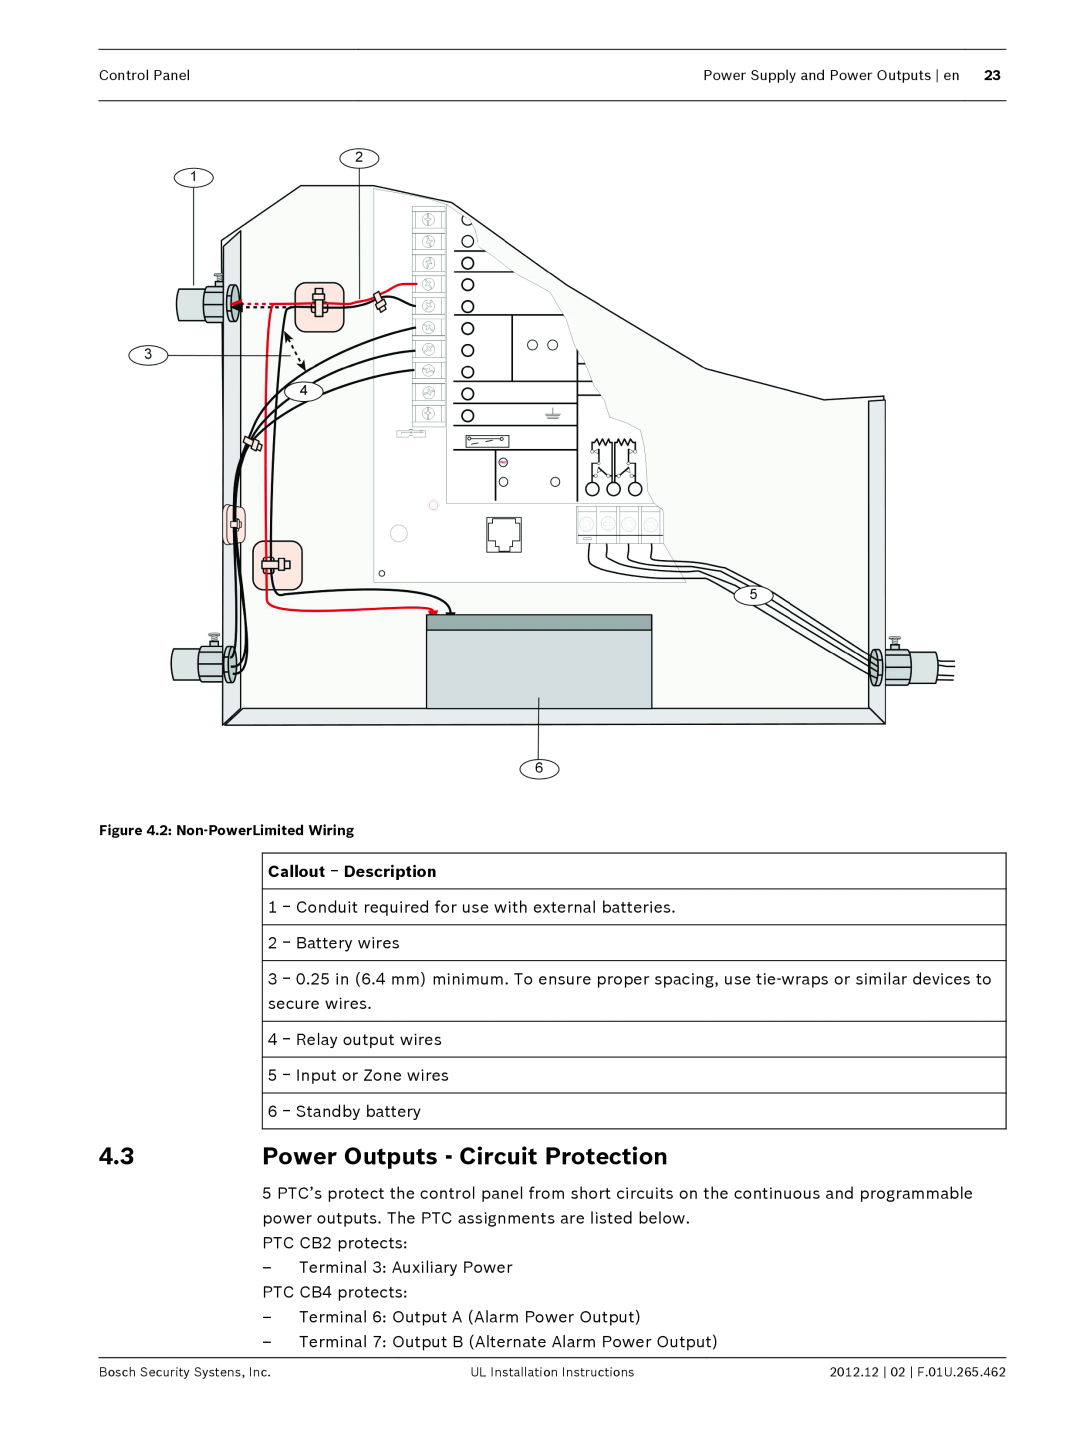 Bosch Appliances D9412GV4 installation instructions Power Outputs - Circuit Protection 